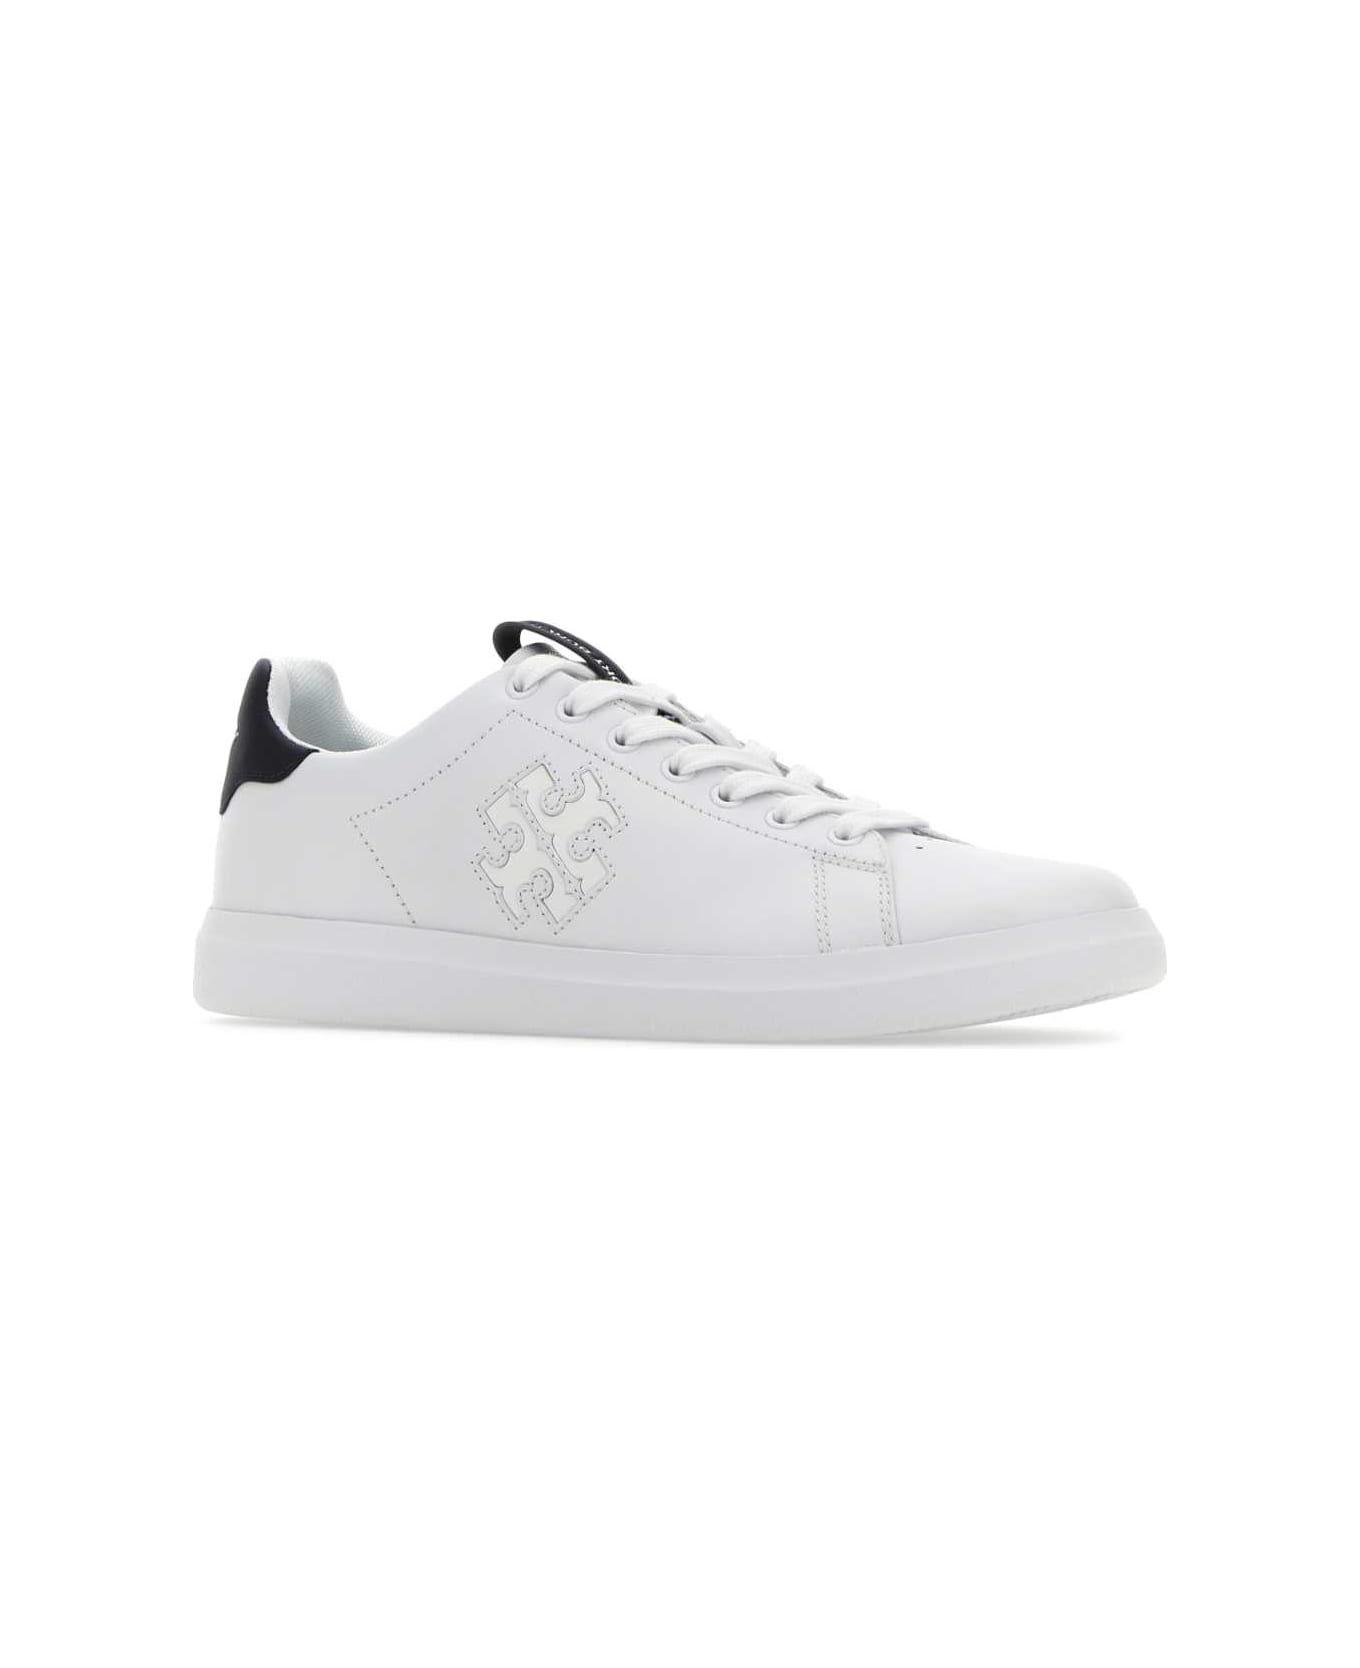 Tory Burch Chalk Leather Howell Court Sneakers - WHITEPERFECTNAVY